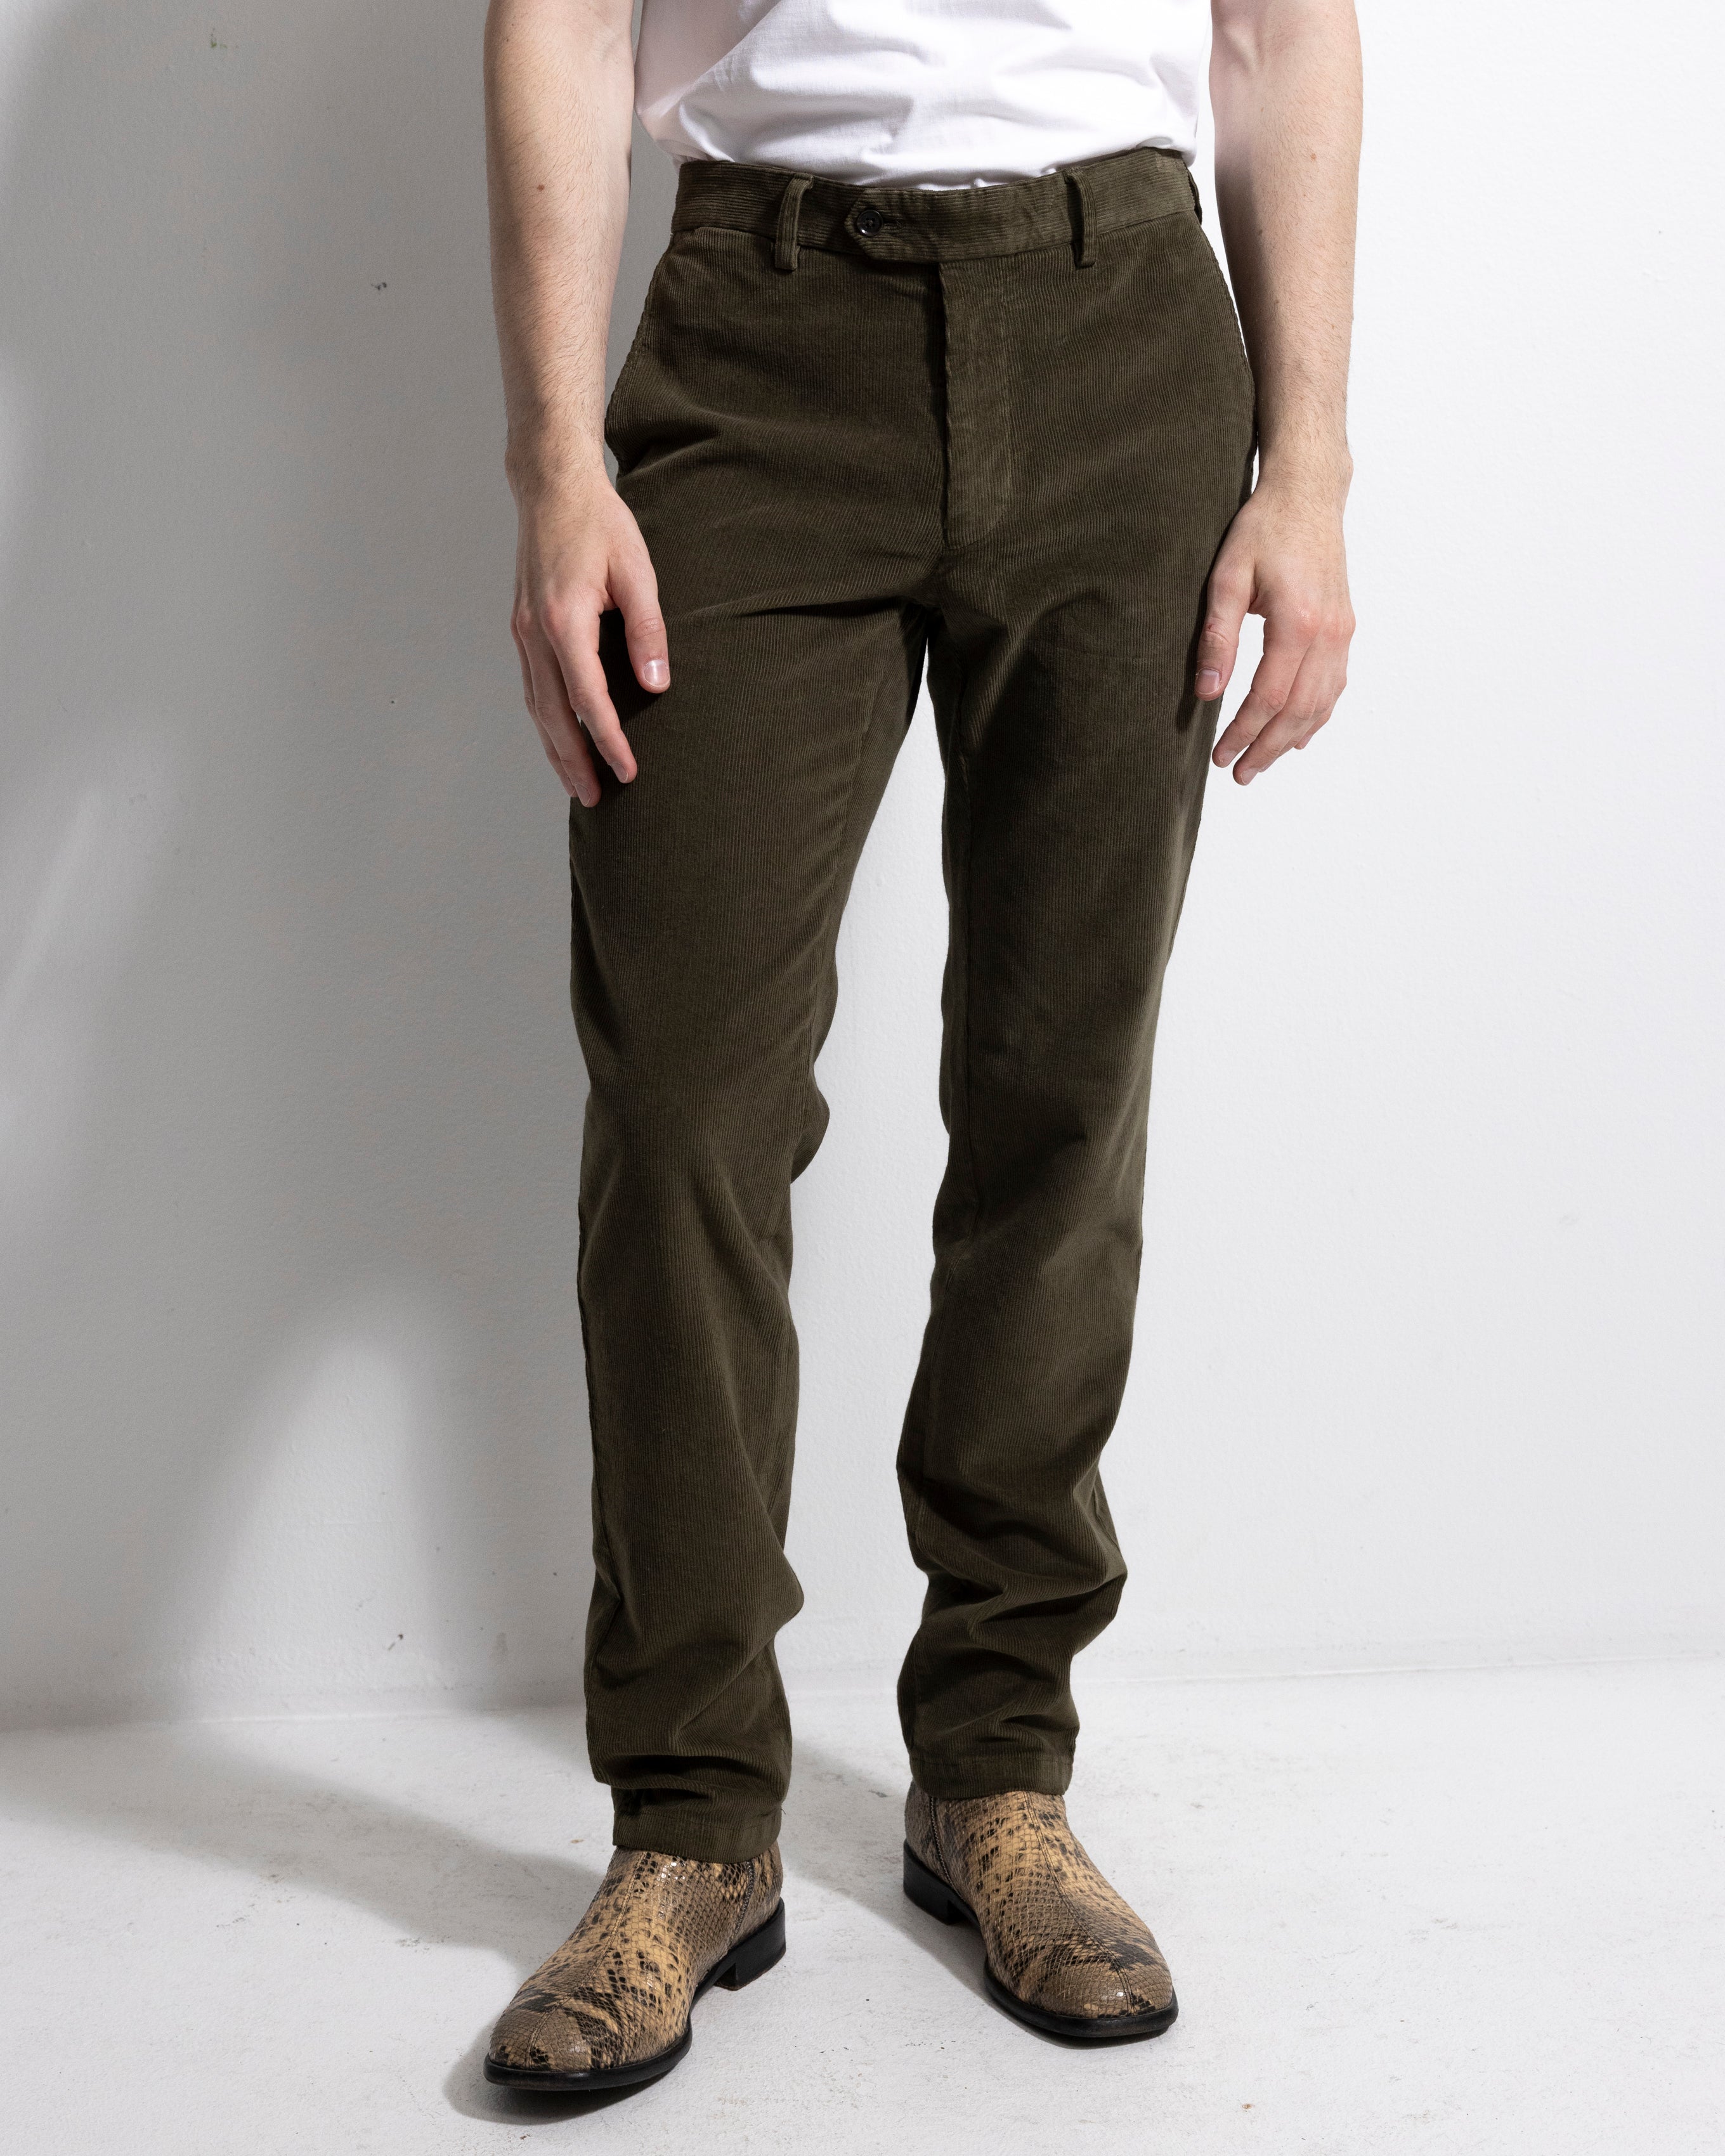 Ljung - Trousers Cord Dk Olive Green